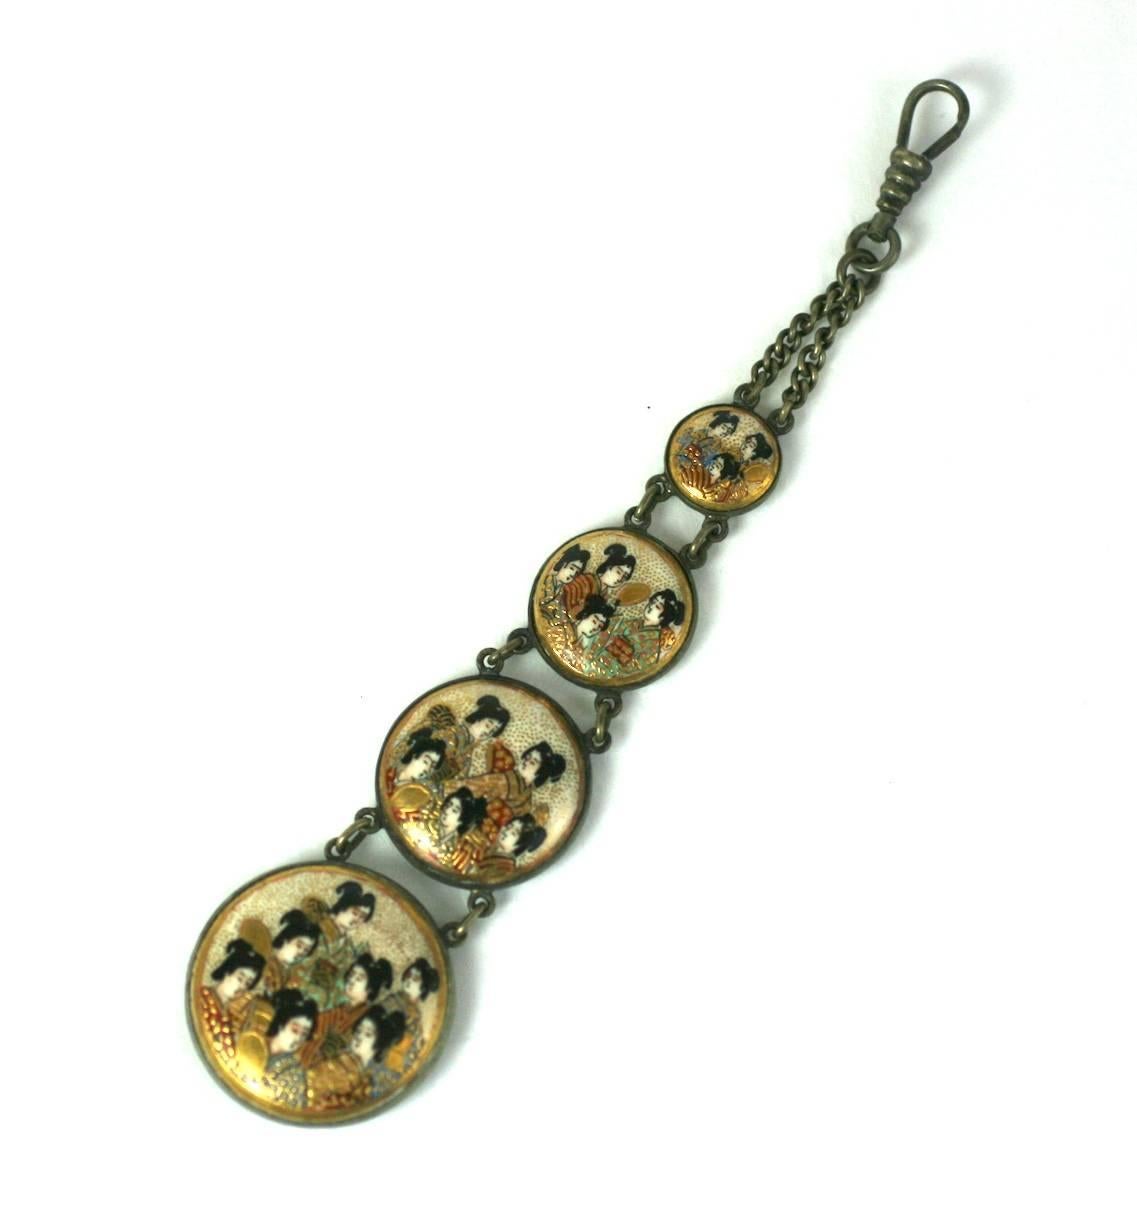 Satsuma graduated button fob from the late 19th Century. 1870's Japan. Excellent condition. 
6